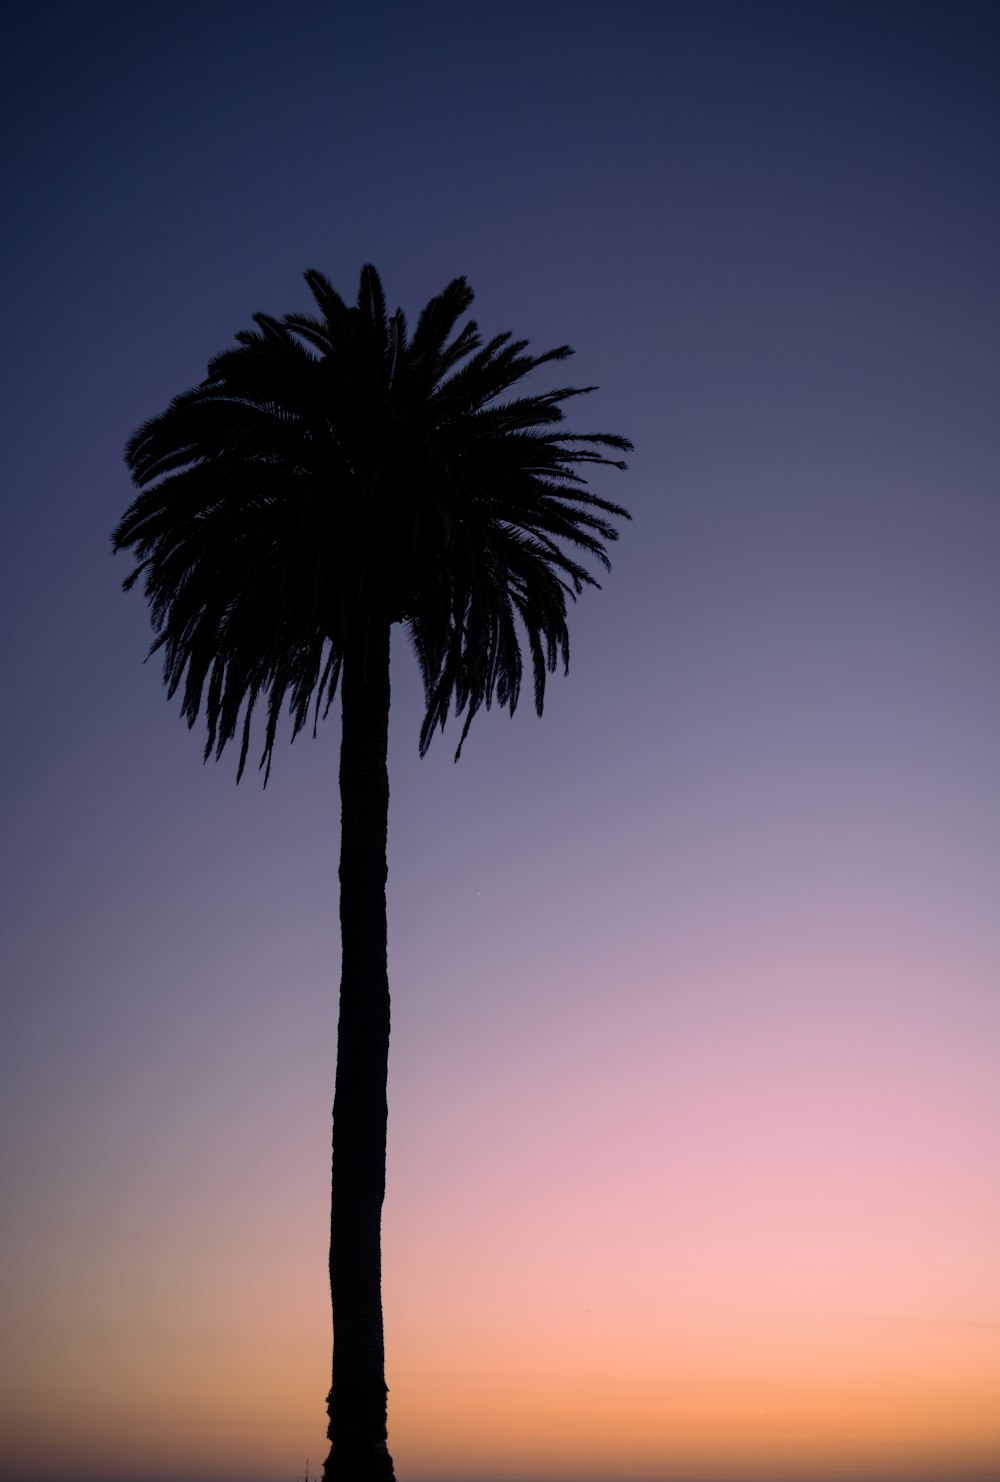 a silhouette of a palm tree against a purple and blue sky